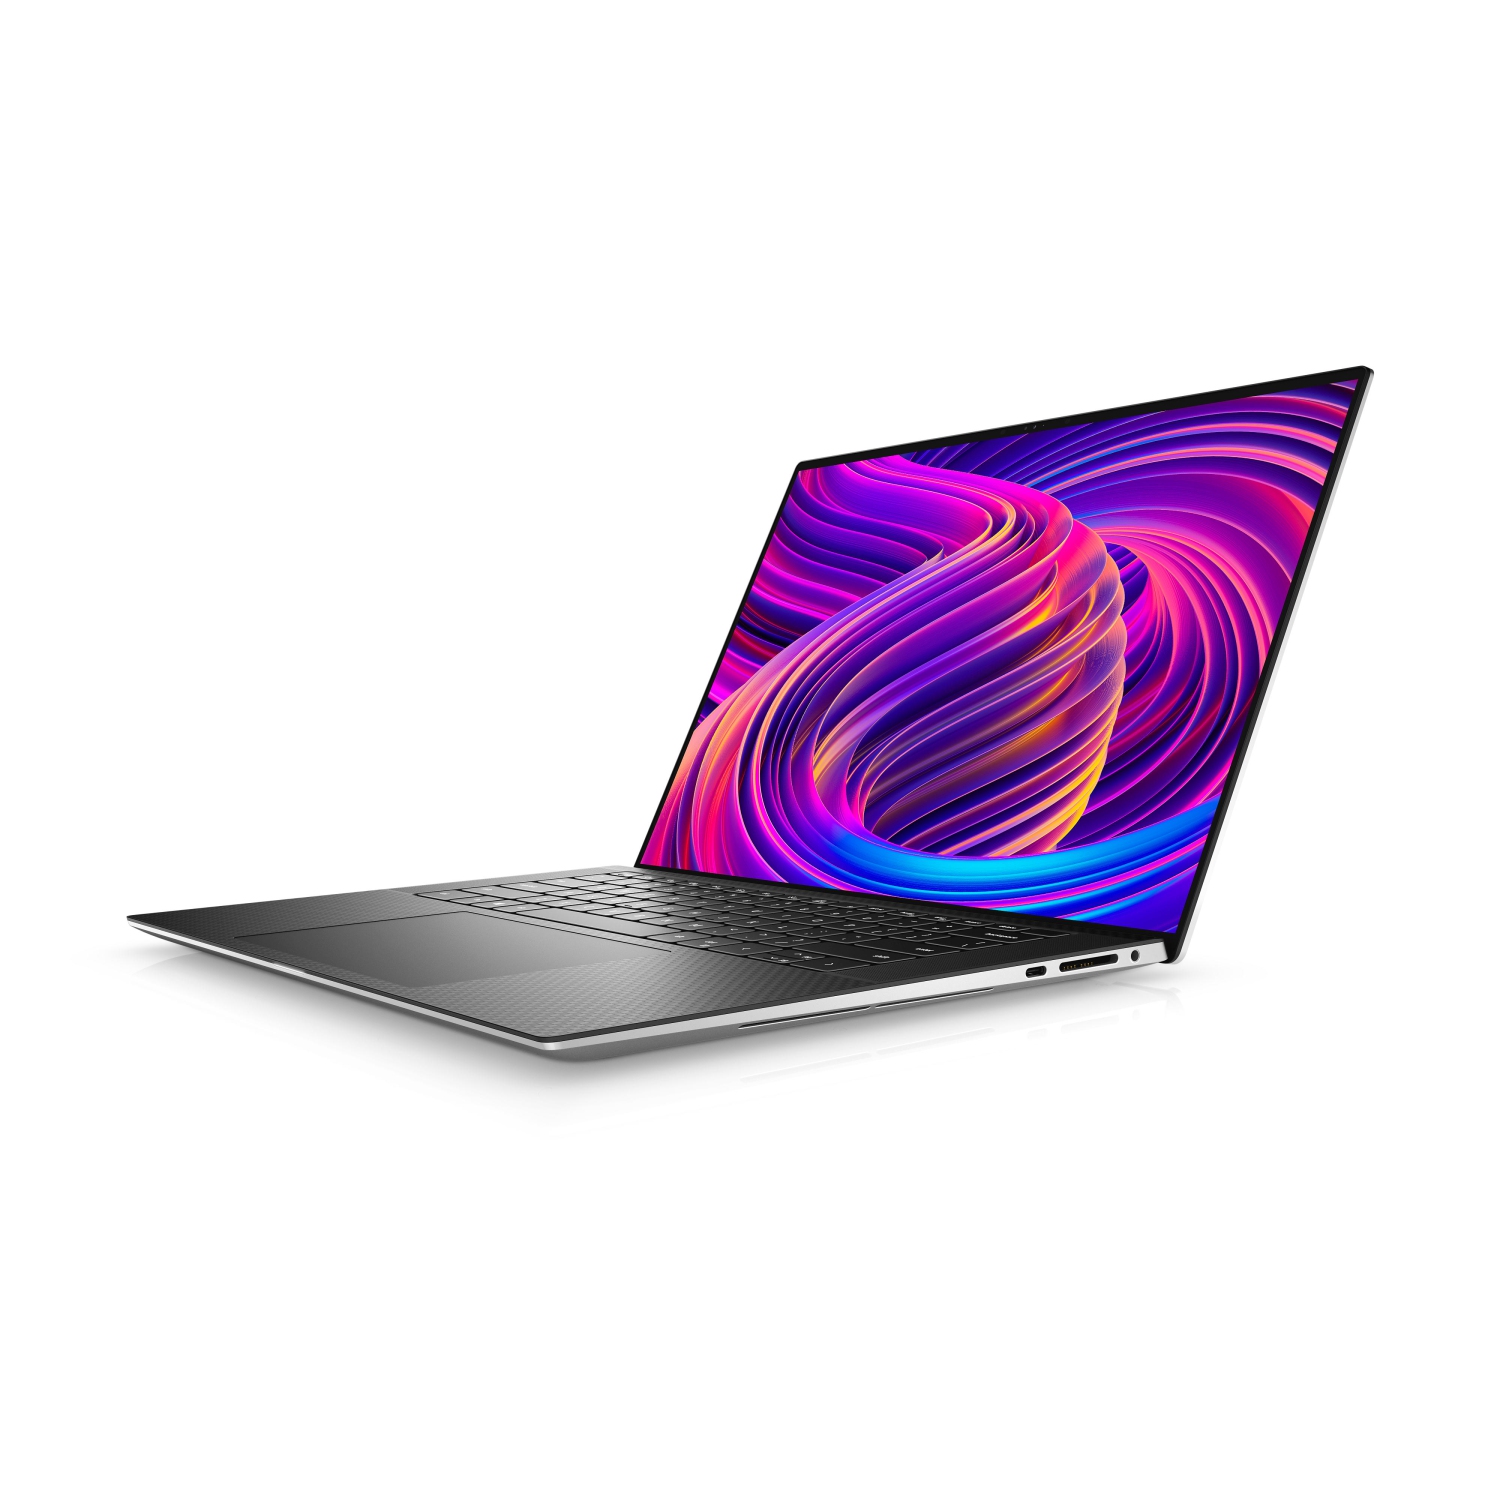 Refurbished (Excellent) - Dell XPS 15 9510 Laptop (2021) | 15.6" FHD+ | Core i9 - 1TB SSD - 64GB RAM - 3050 Ti | 8 Cores @ 4.9 GHz - 11th Gen CPU Certified Refurbished